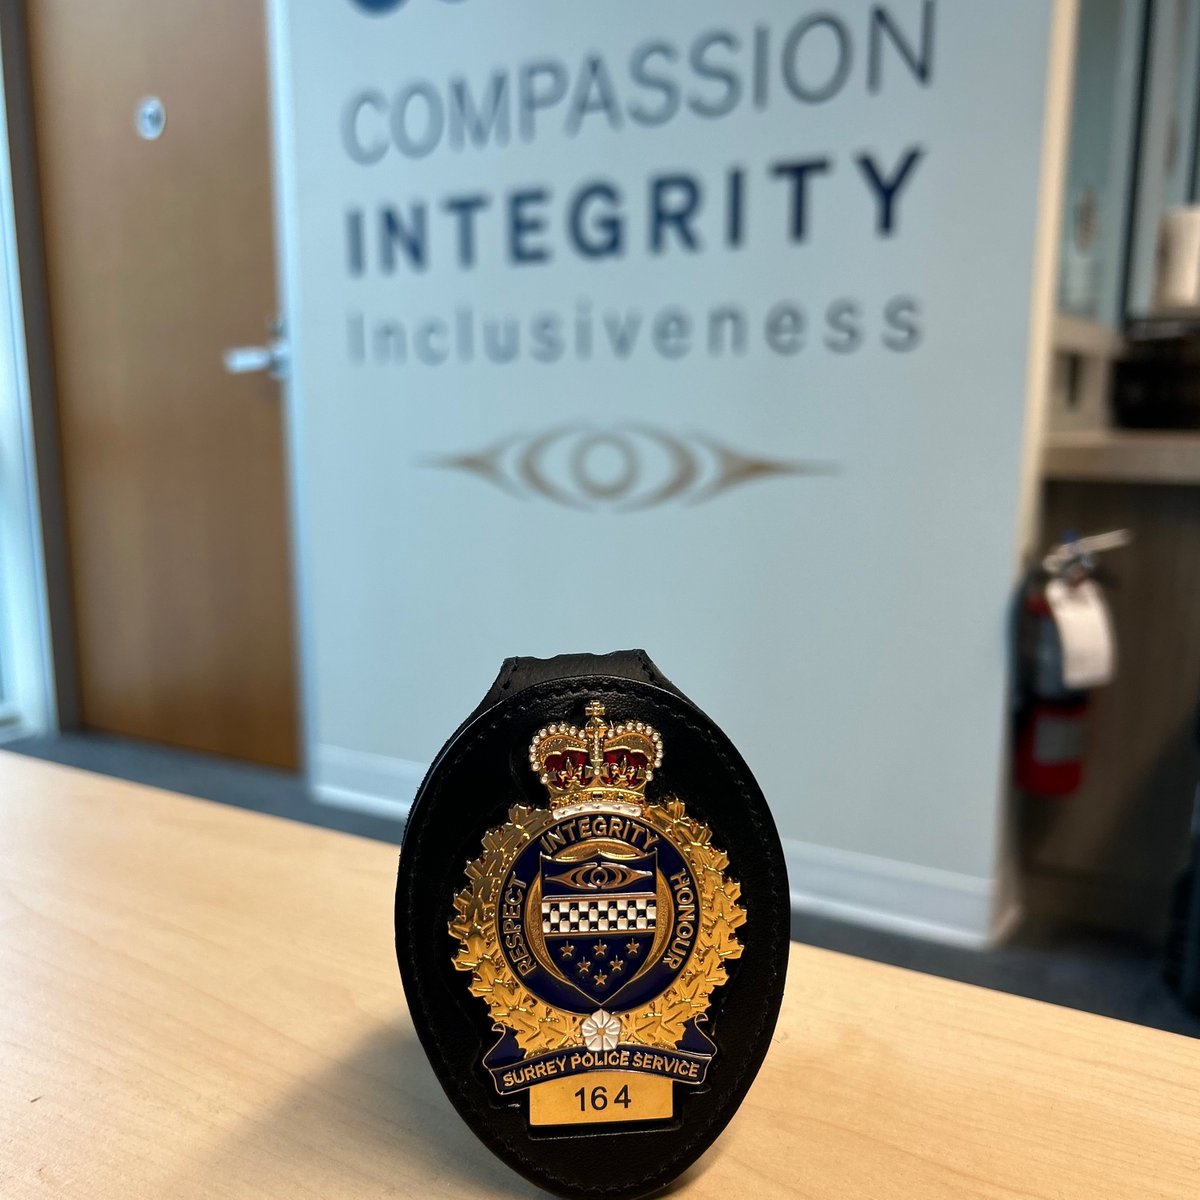 Proud to work @surreyps building the Community1st Unit has been the highlight of my 23 year career. At SPS we strive to be the most progressive, community based Police Service in the country. #joinus #community1st #proud #copwhocares